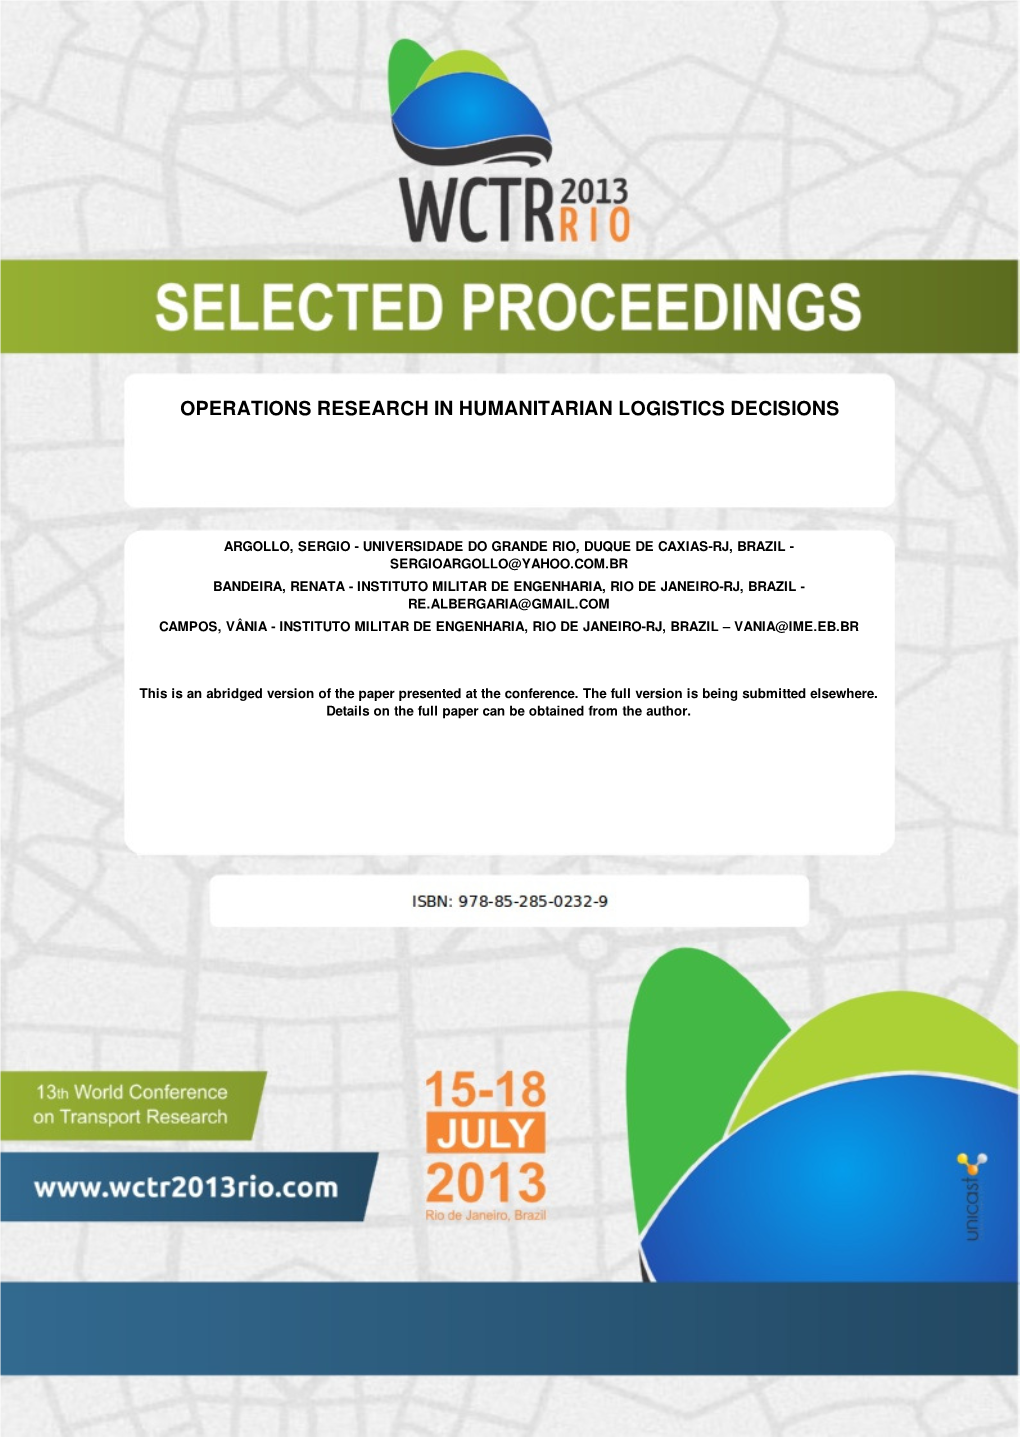 Operations Research in Humanitarian Logistics Decisions